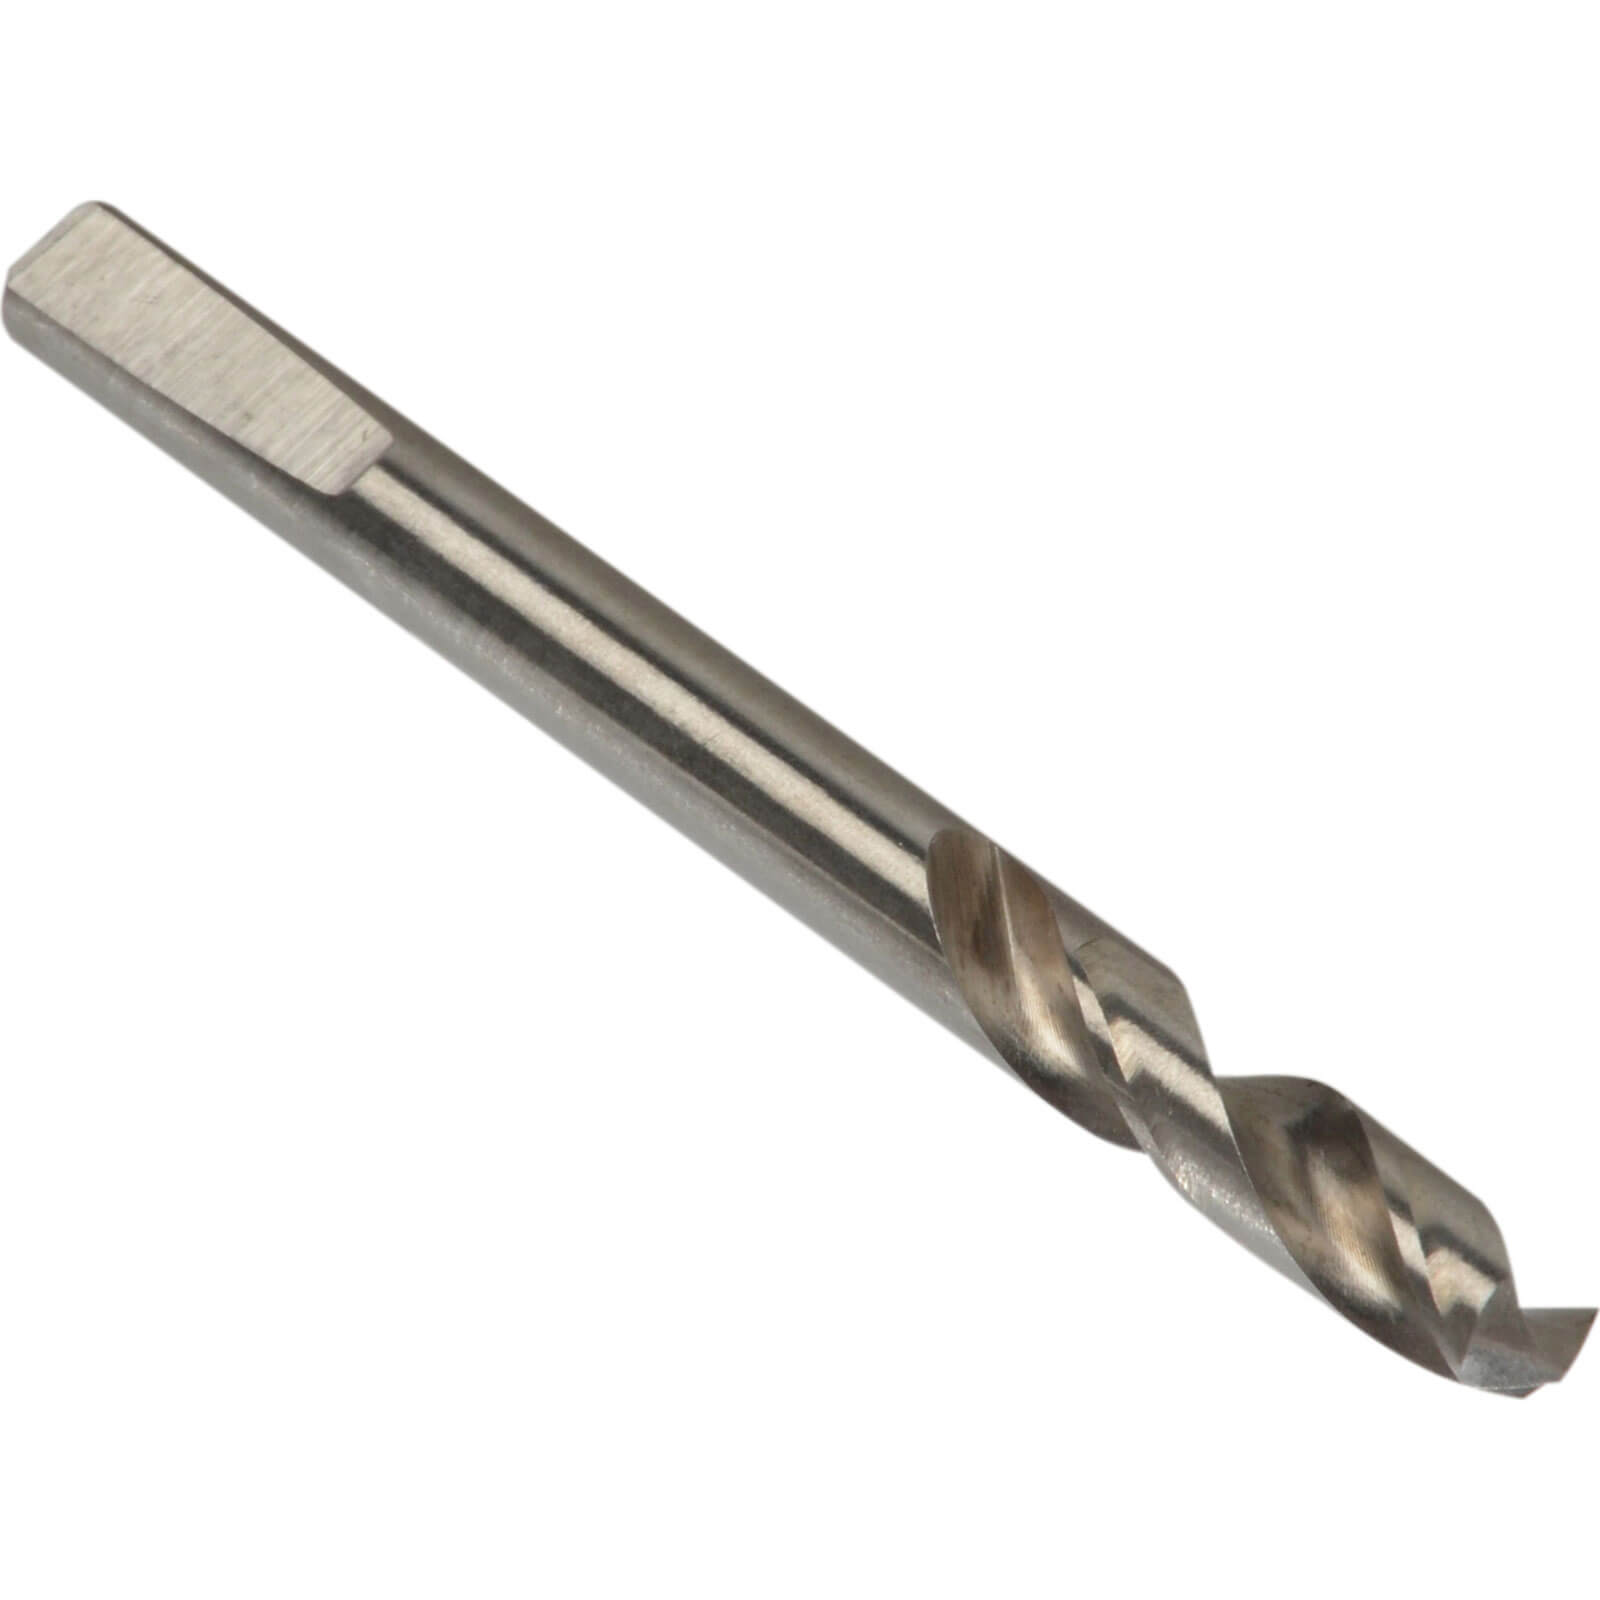 Image of Bahco Replacement HSS Pilot Drill Bit for Hole Saw Arbors